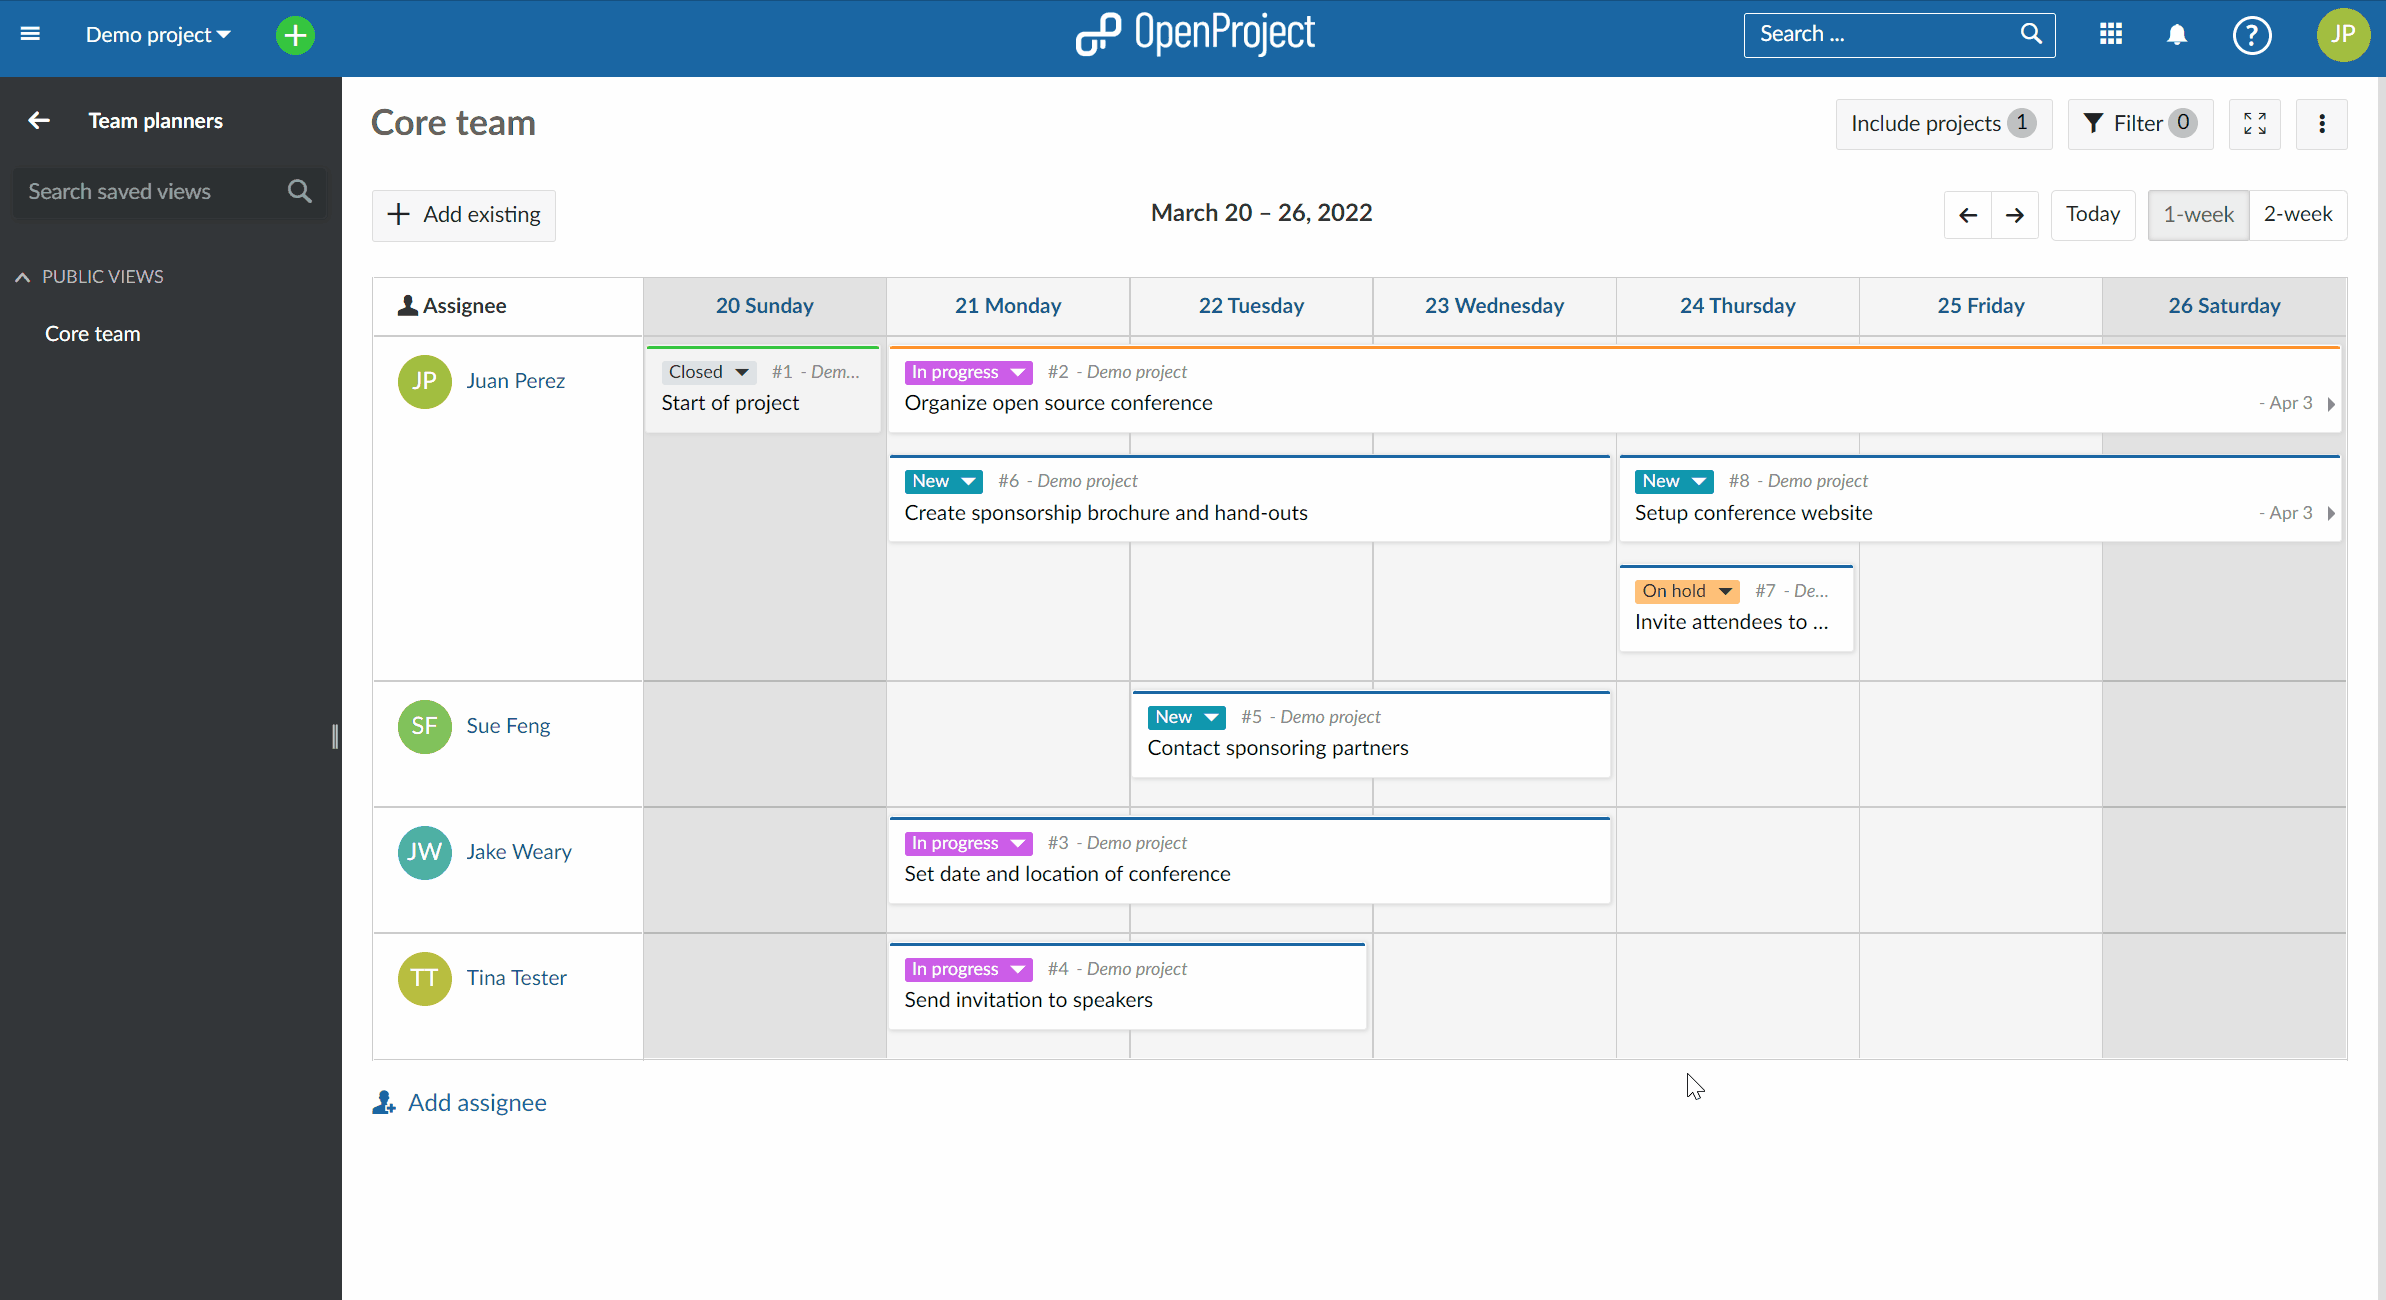 Team planner add existing work package and create new